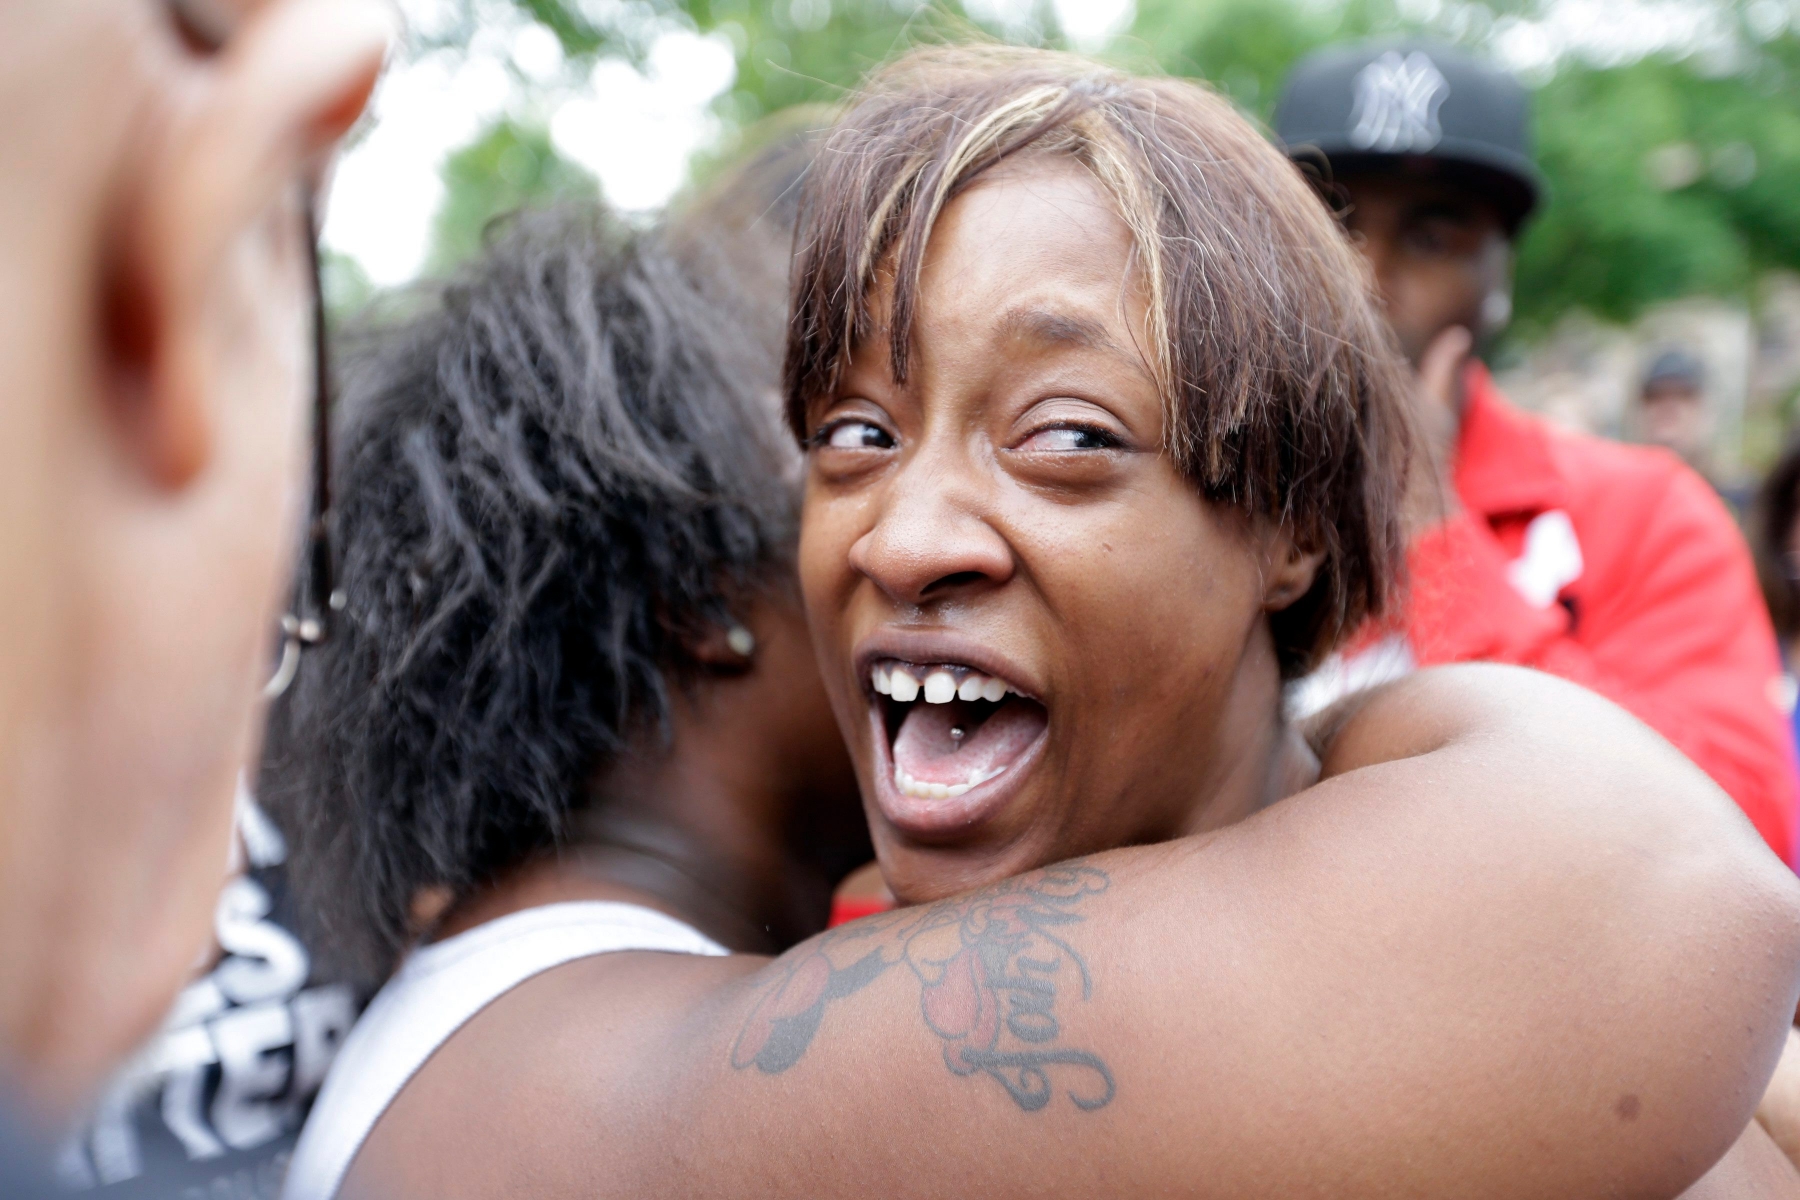 Diamond Reynolds, the girlfriend of Philando Castile,  is consoled as she talks about his shooting death with protesters and media outside the governor's residence in St. Paul, Minn. Castile was shot and killed after a traffic stop by police in Falcon Heights, Wednesday night. A video shot by Reynolds of the shooting  went viral.  (AP Photo/Jim Mone) Police Shooting Minnesota